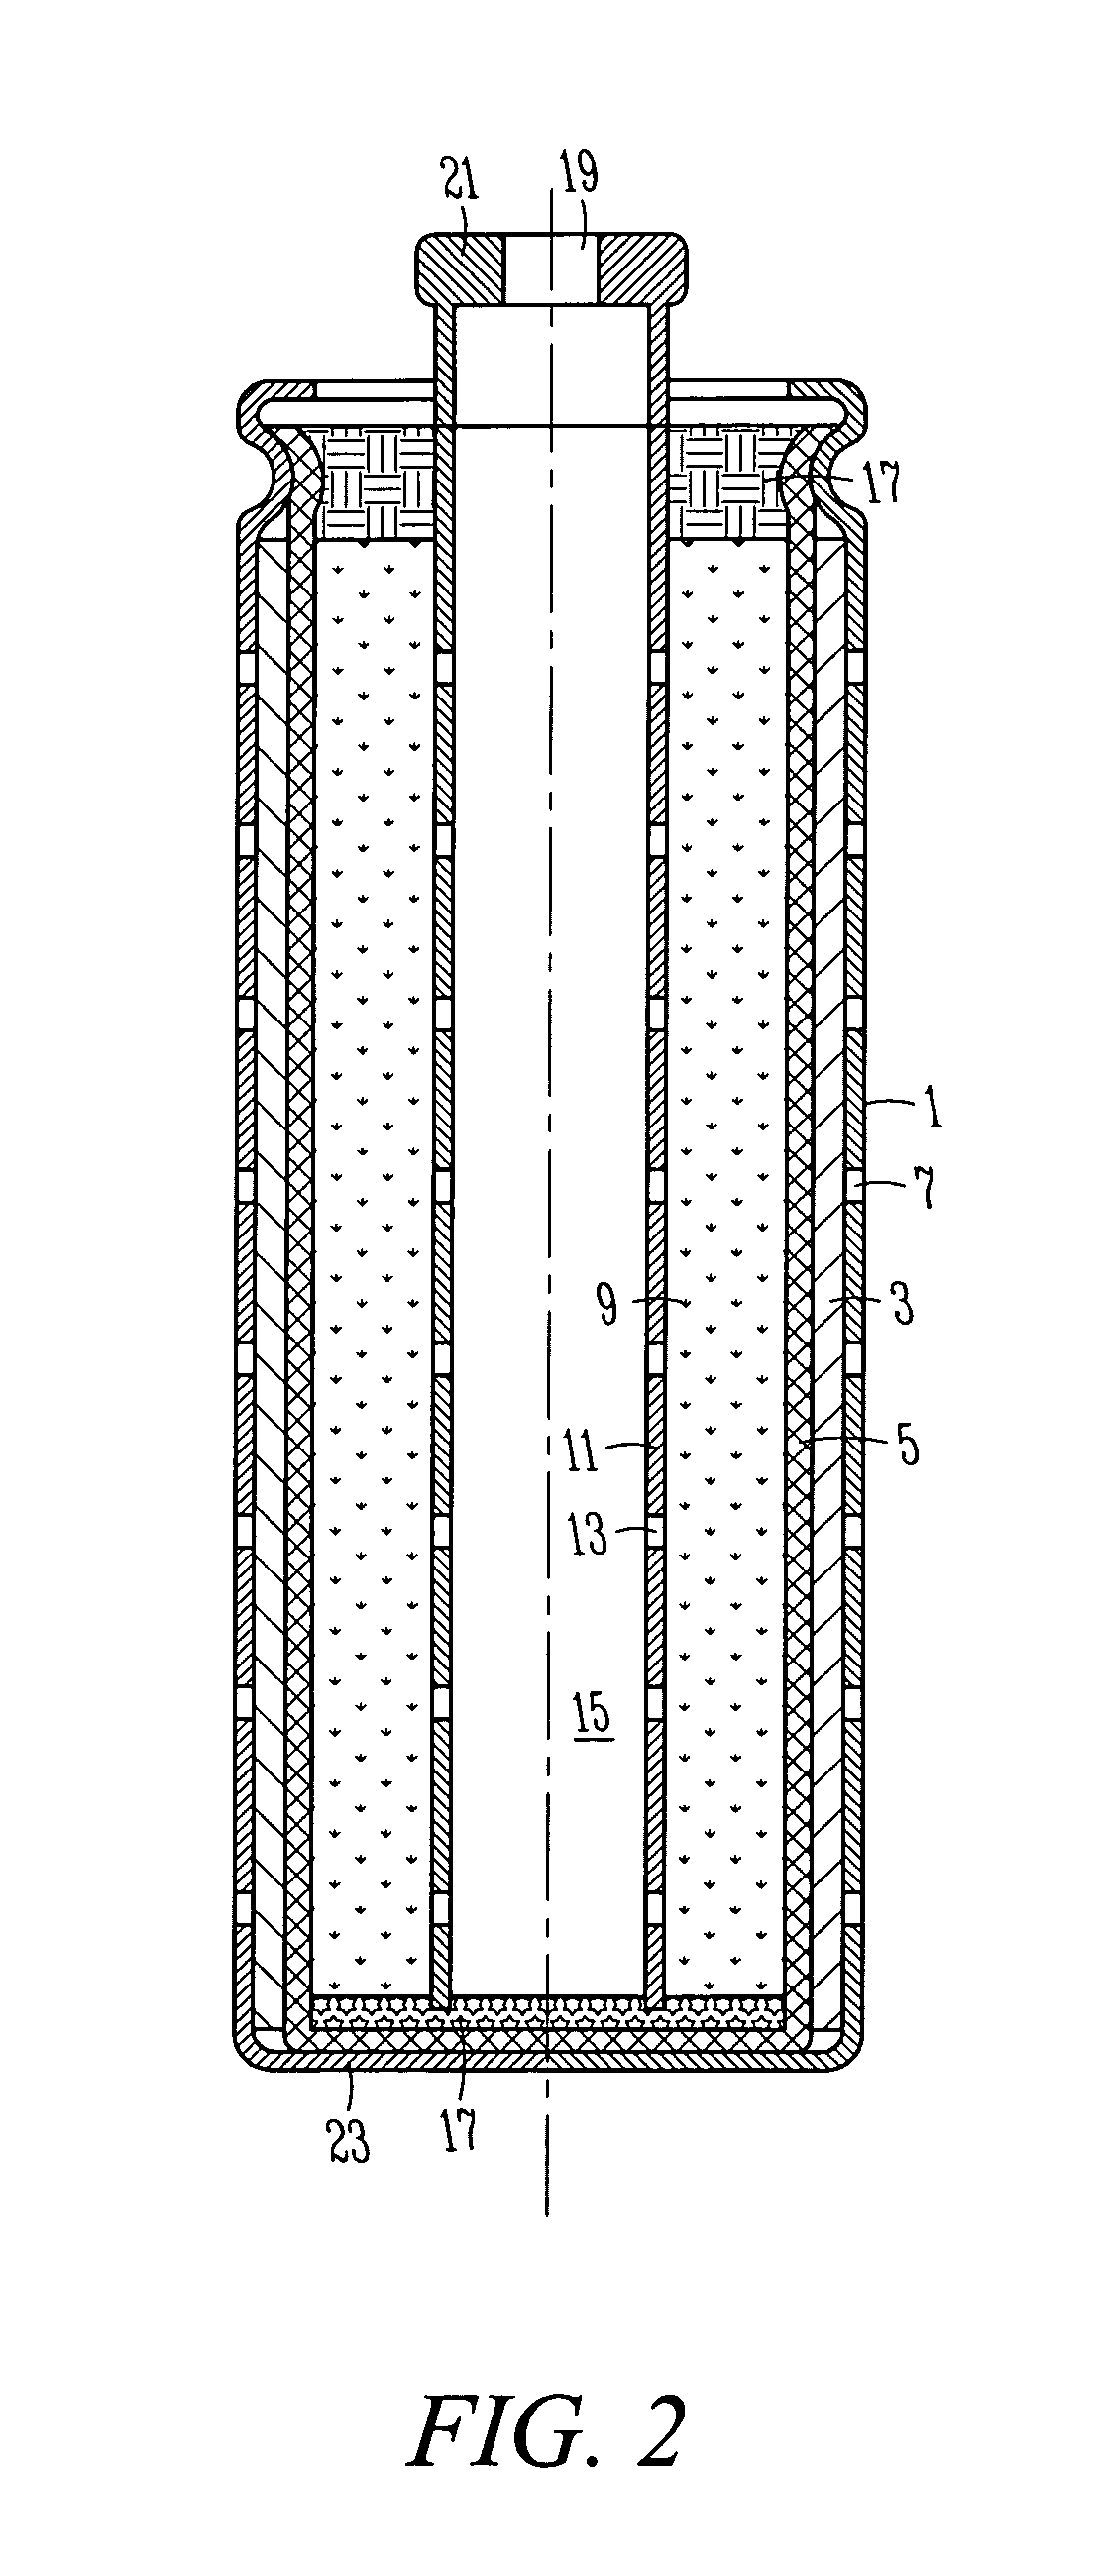 Cylindrical structure fuel cell